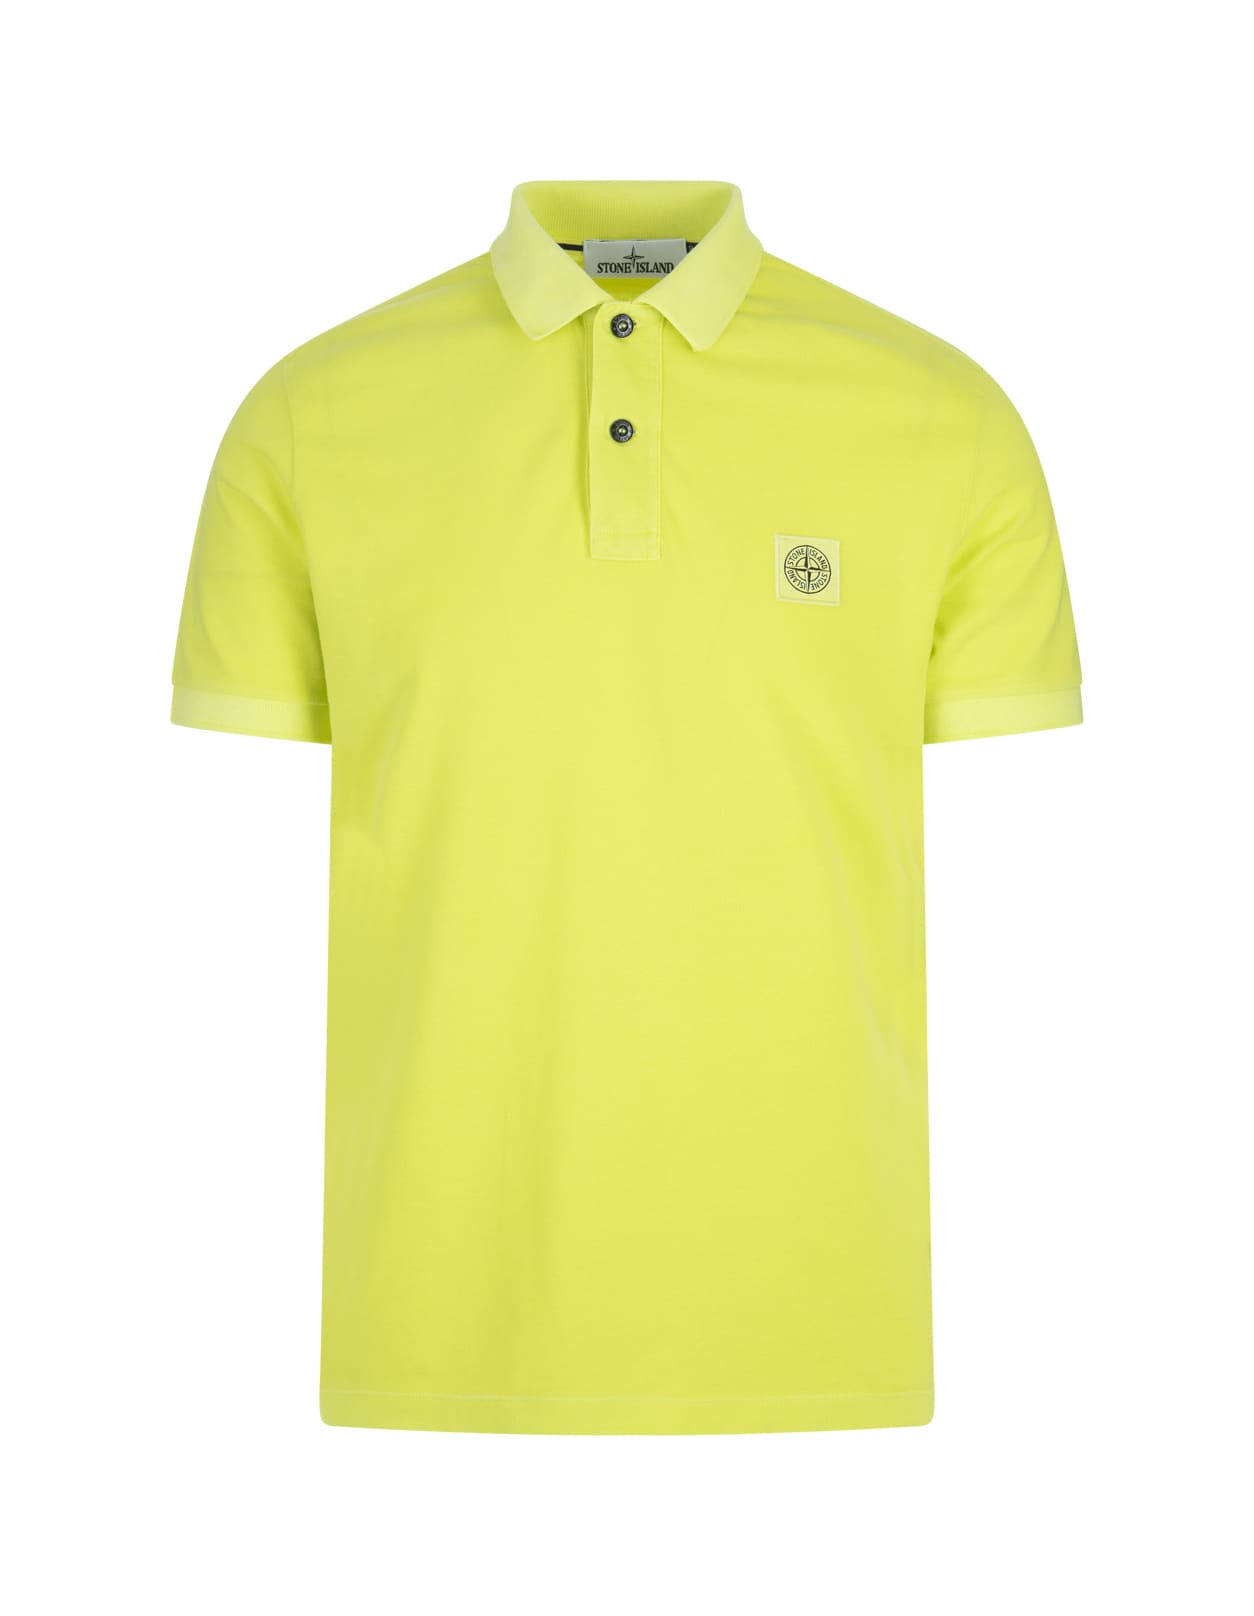 Stone Island Yellow Pigment Dyed Slim Fit Polo Shirt